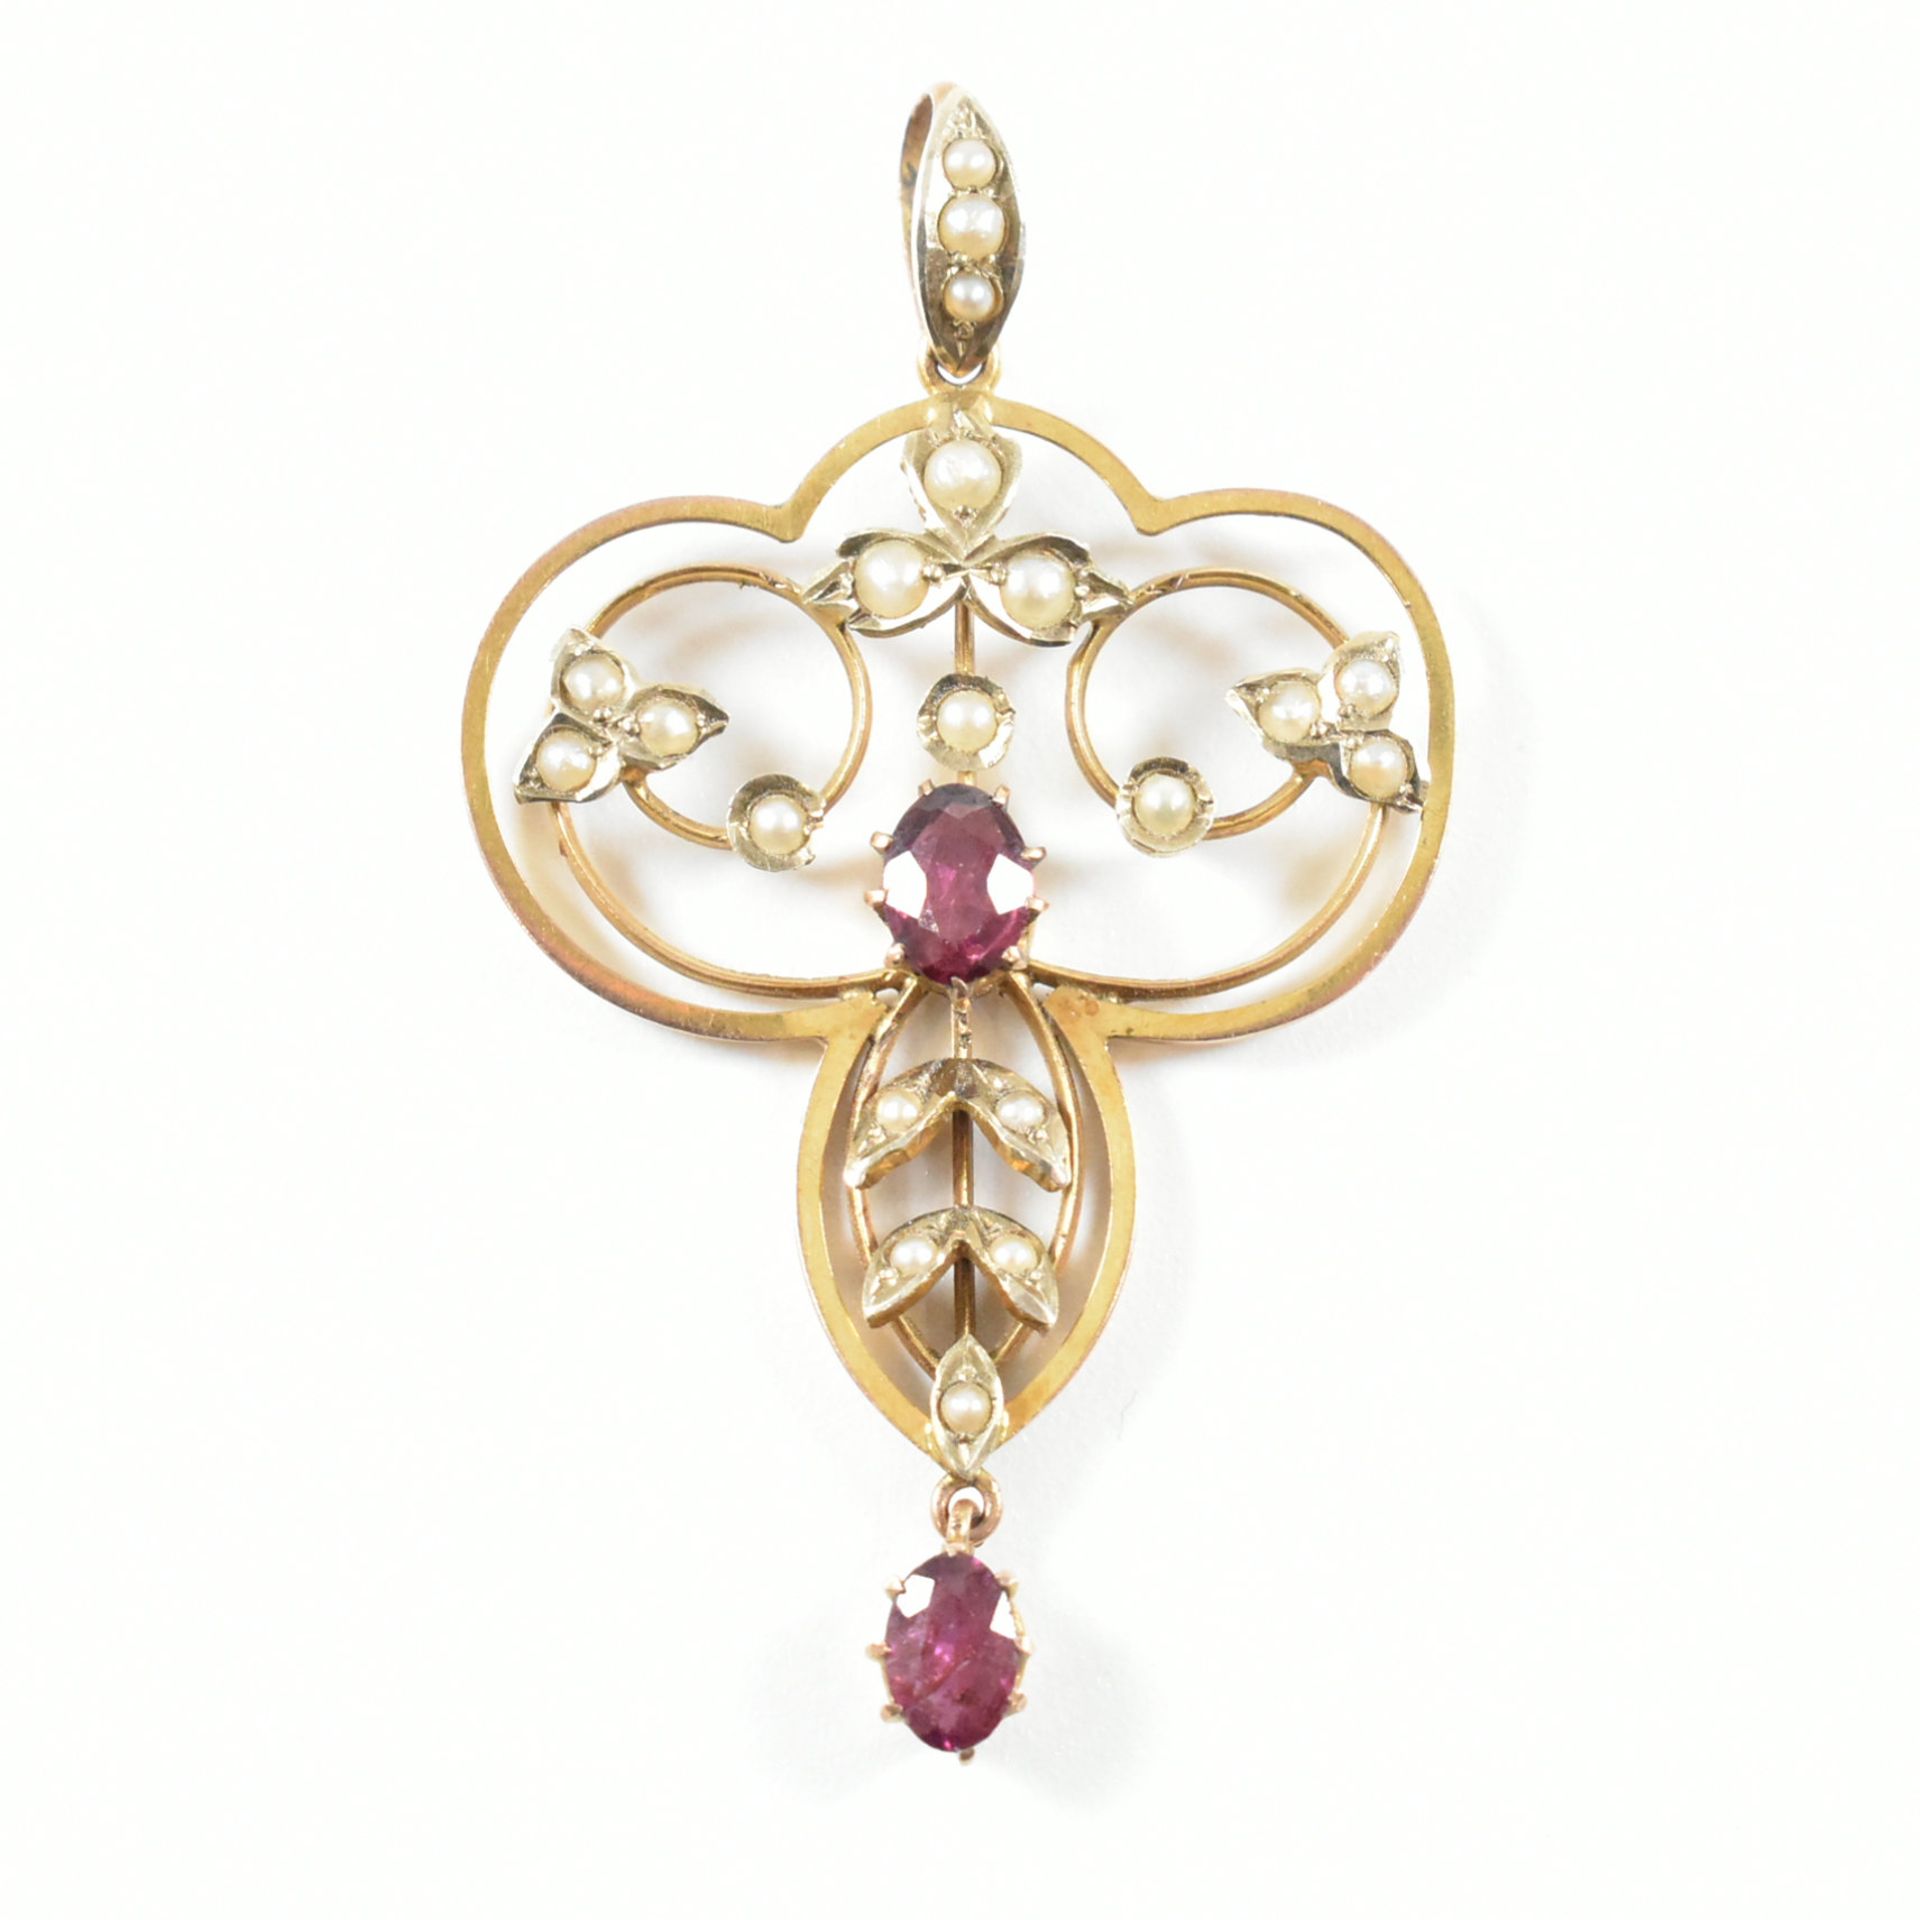 ANTIQUE 9CT GOLD GARNET & SEED PEARL NECKLACE PENDANT